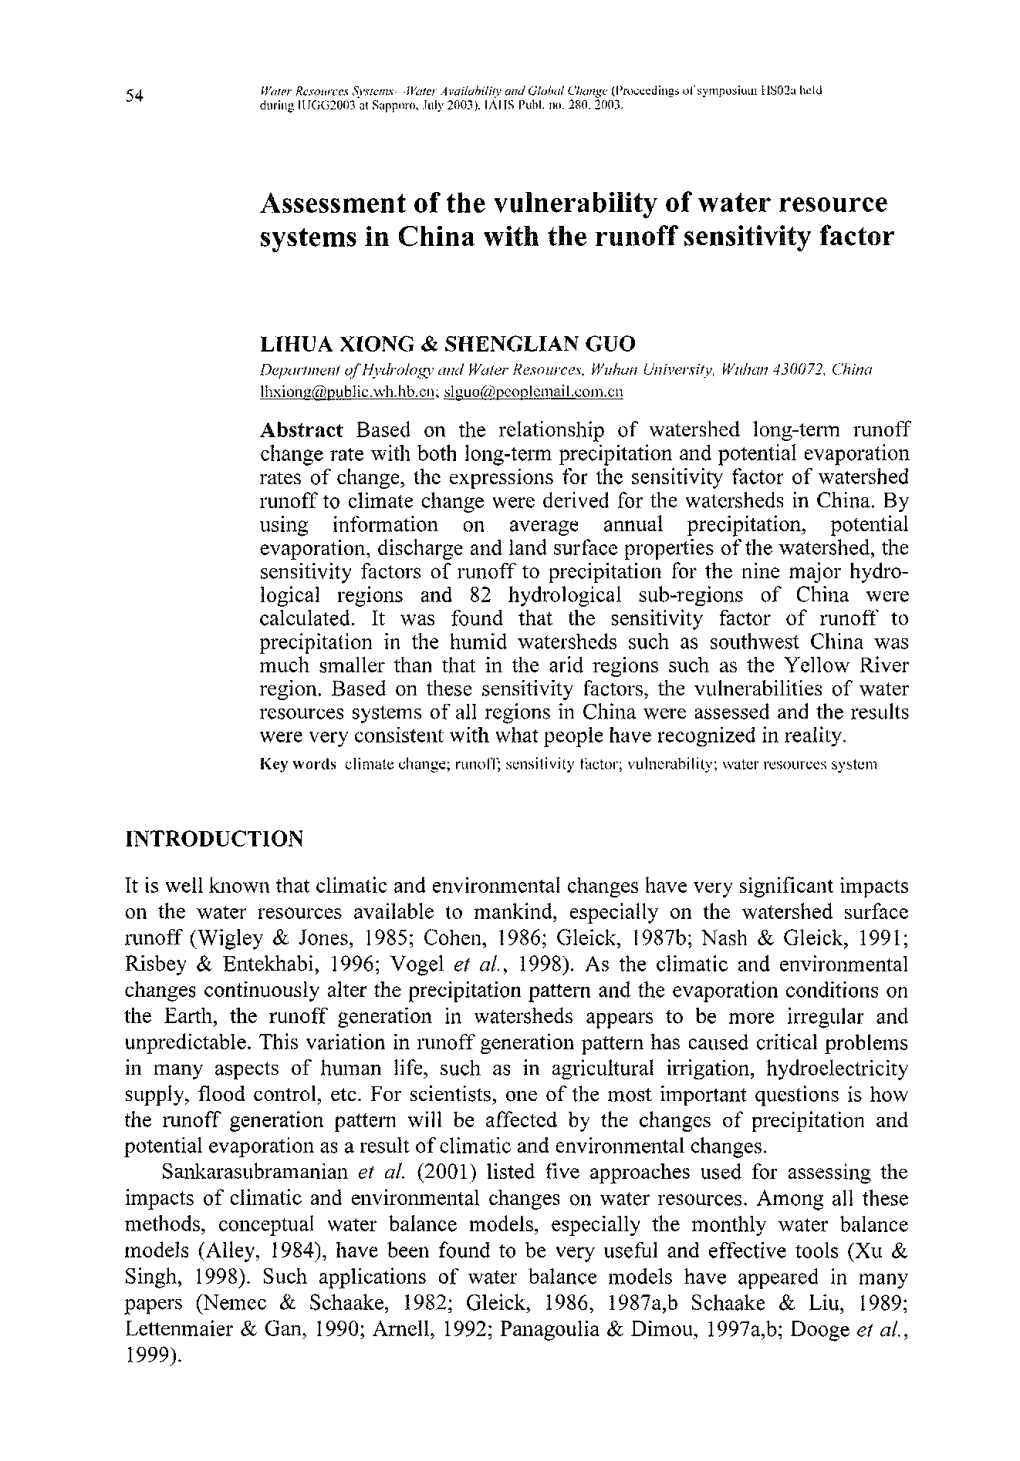 Assessment of the Vulnerability of Water Resource Systems in China with the Runoff Sensitivity Factor